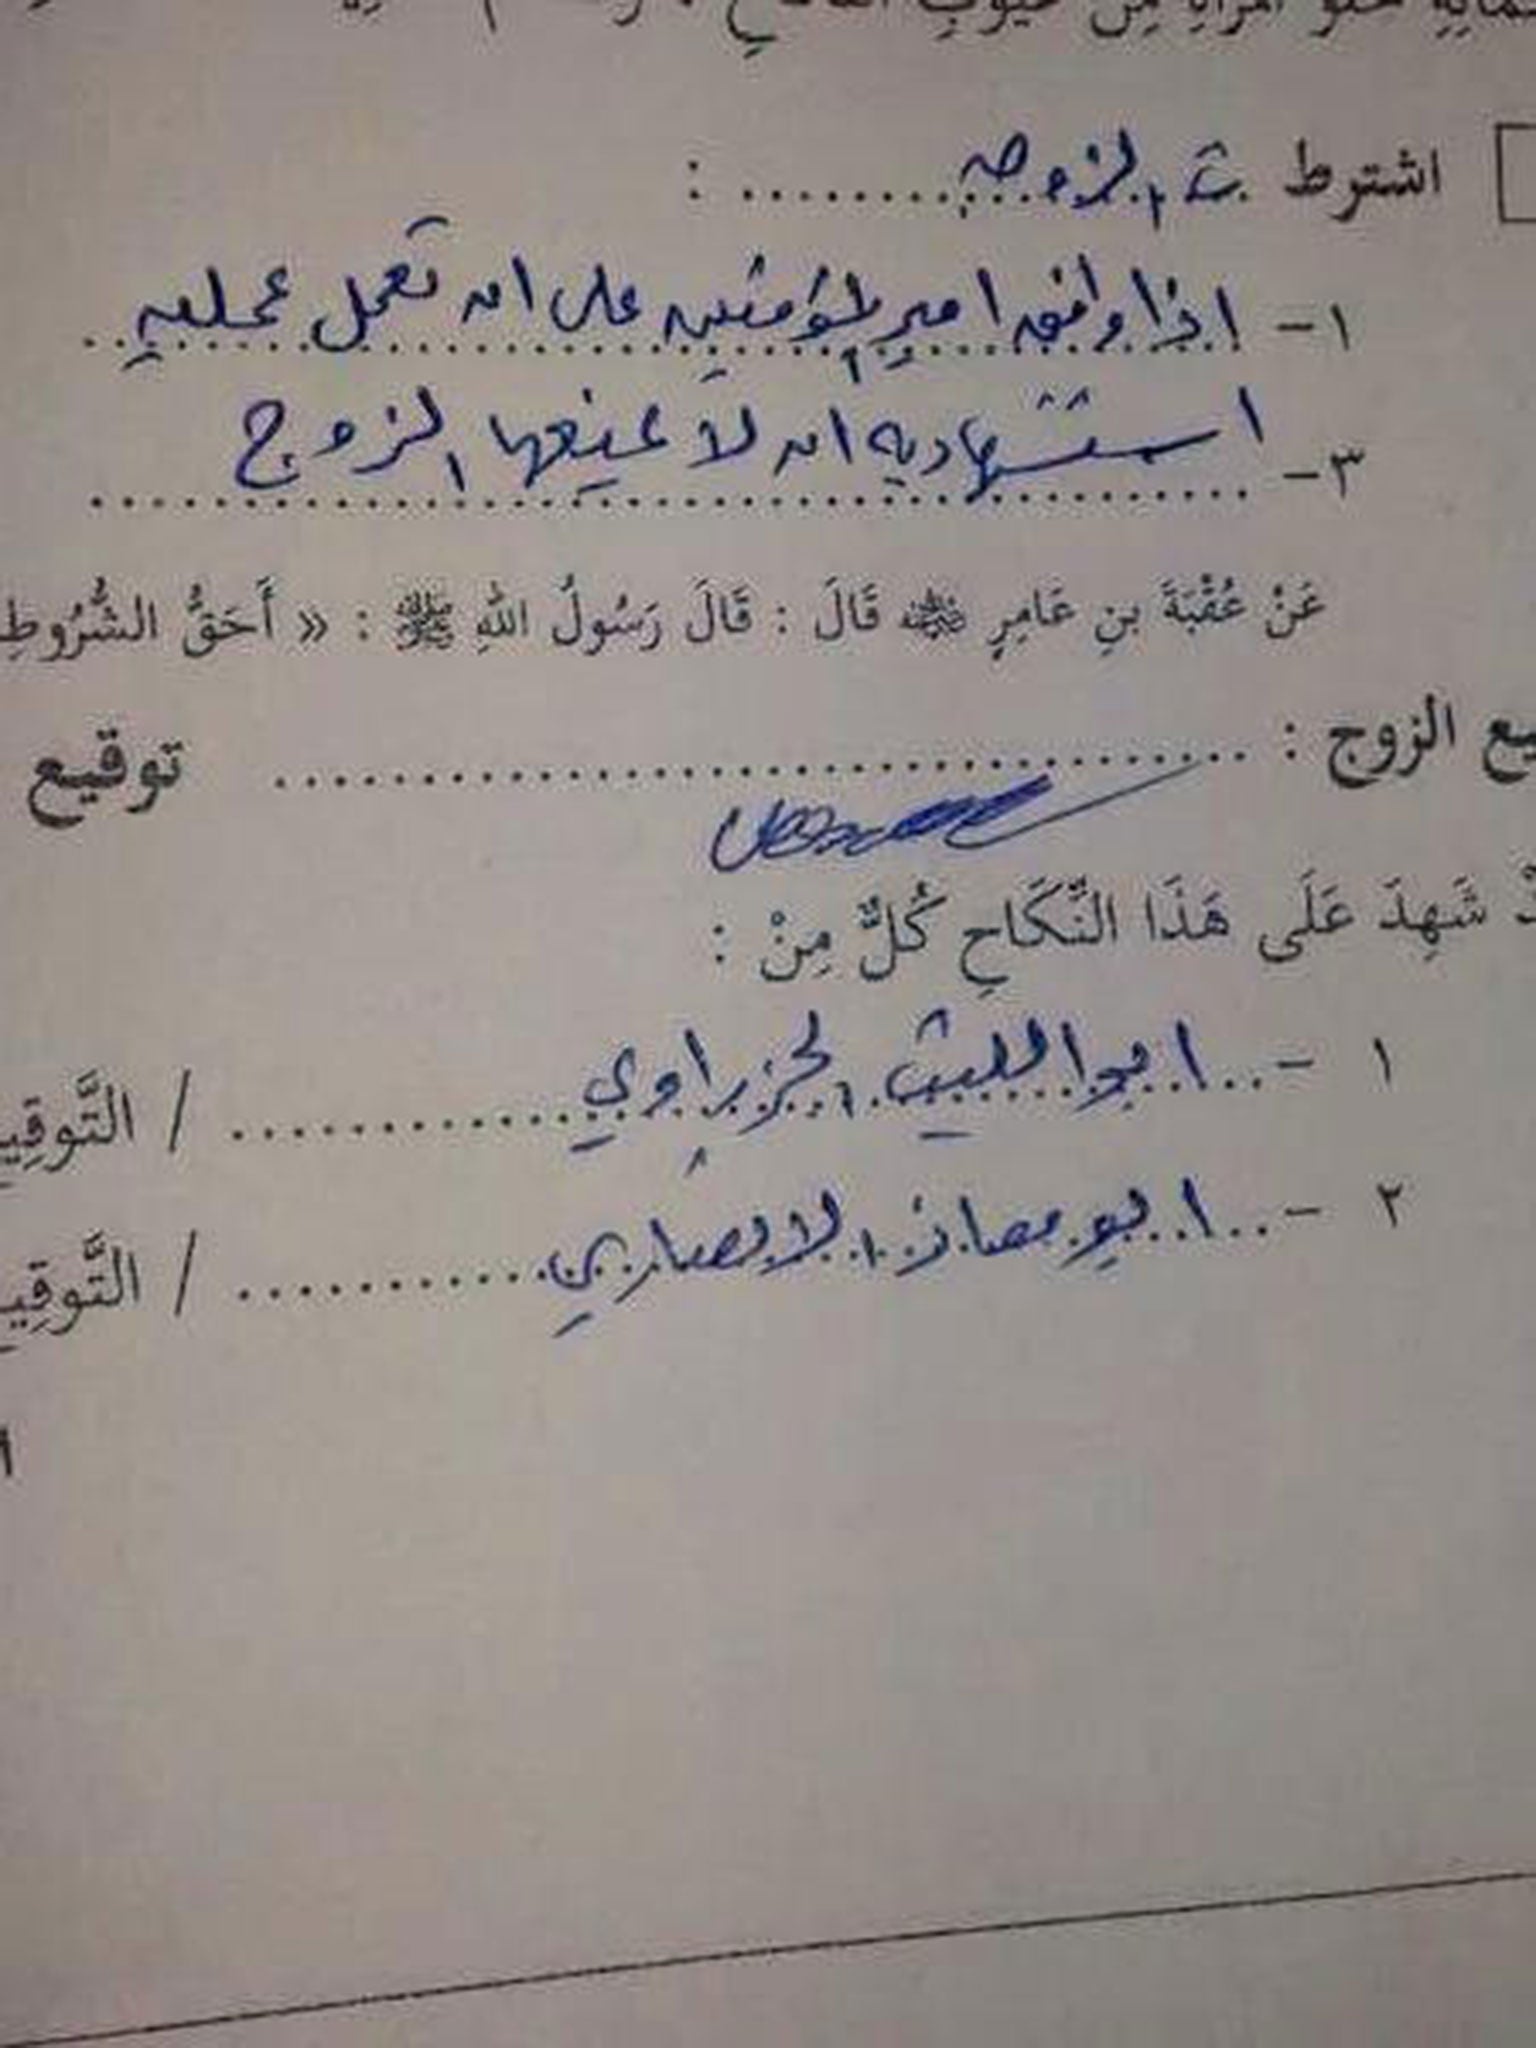 The marriage certificate states a husband cannot stop his wife from being a suicide bomber if Baghdadi gives her permission